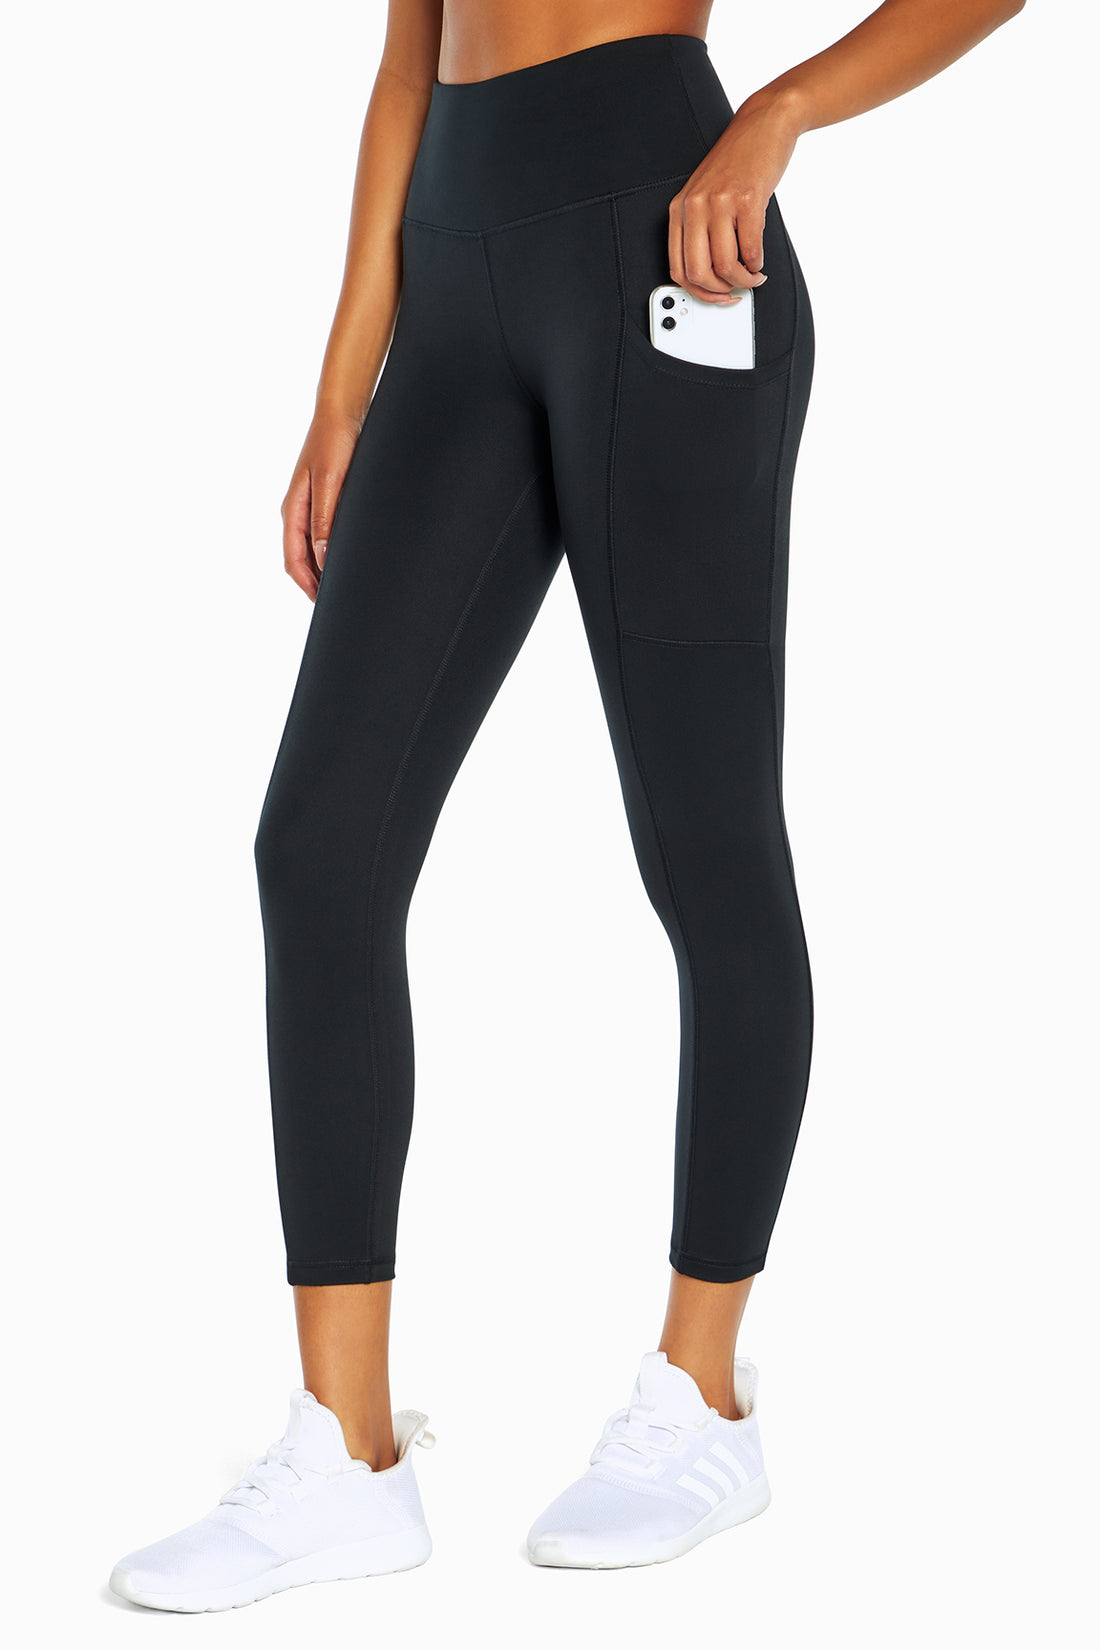 Balance Collection Cropped Leggings Size Large  Balance collection,  Cropped leggings, Leggings